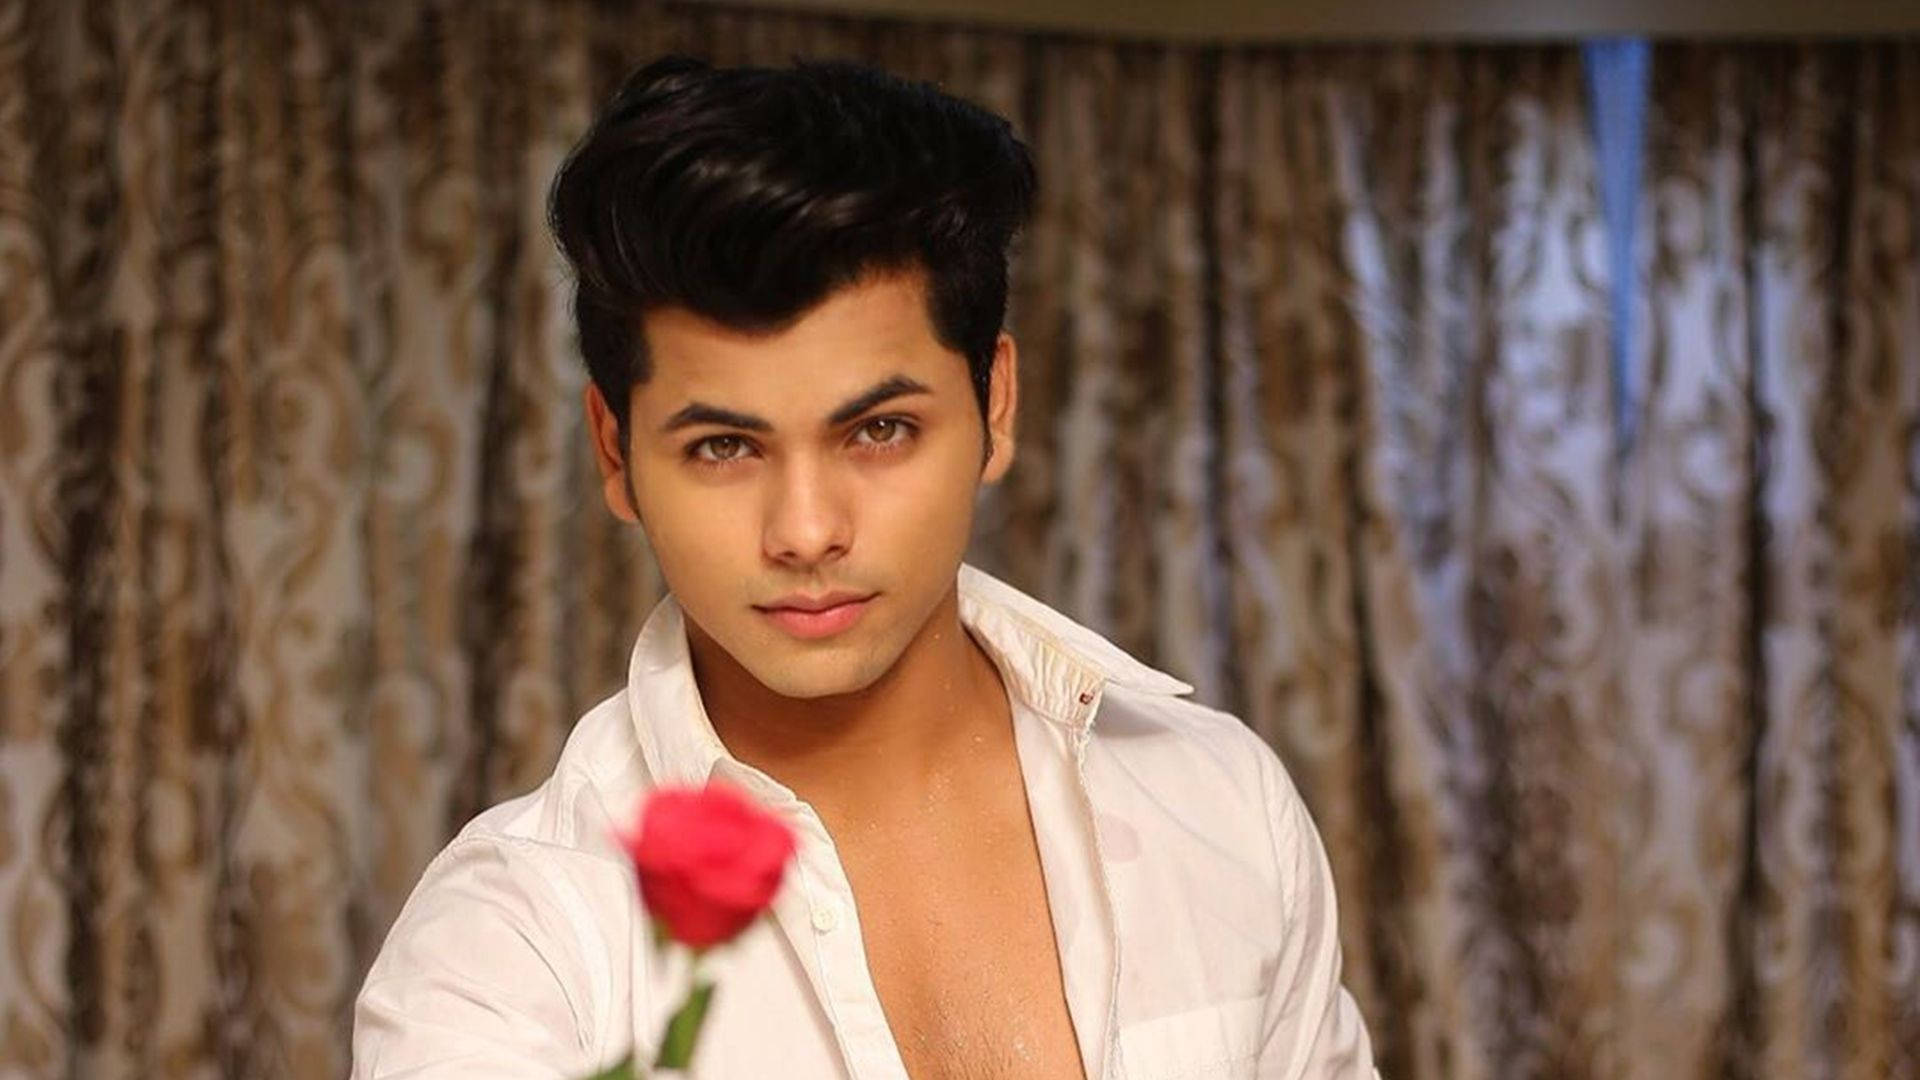 Siddharth Nigam With Rose Wallpaper